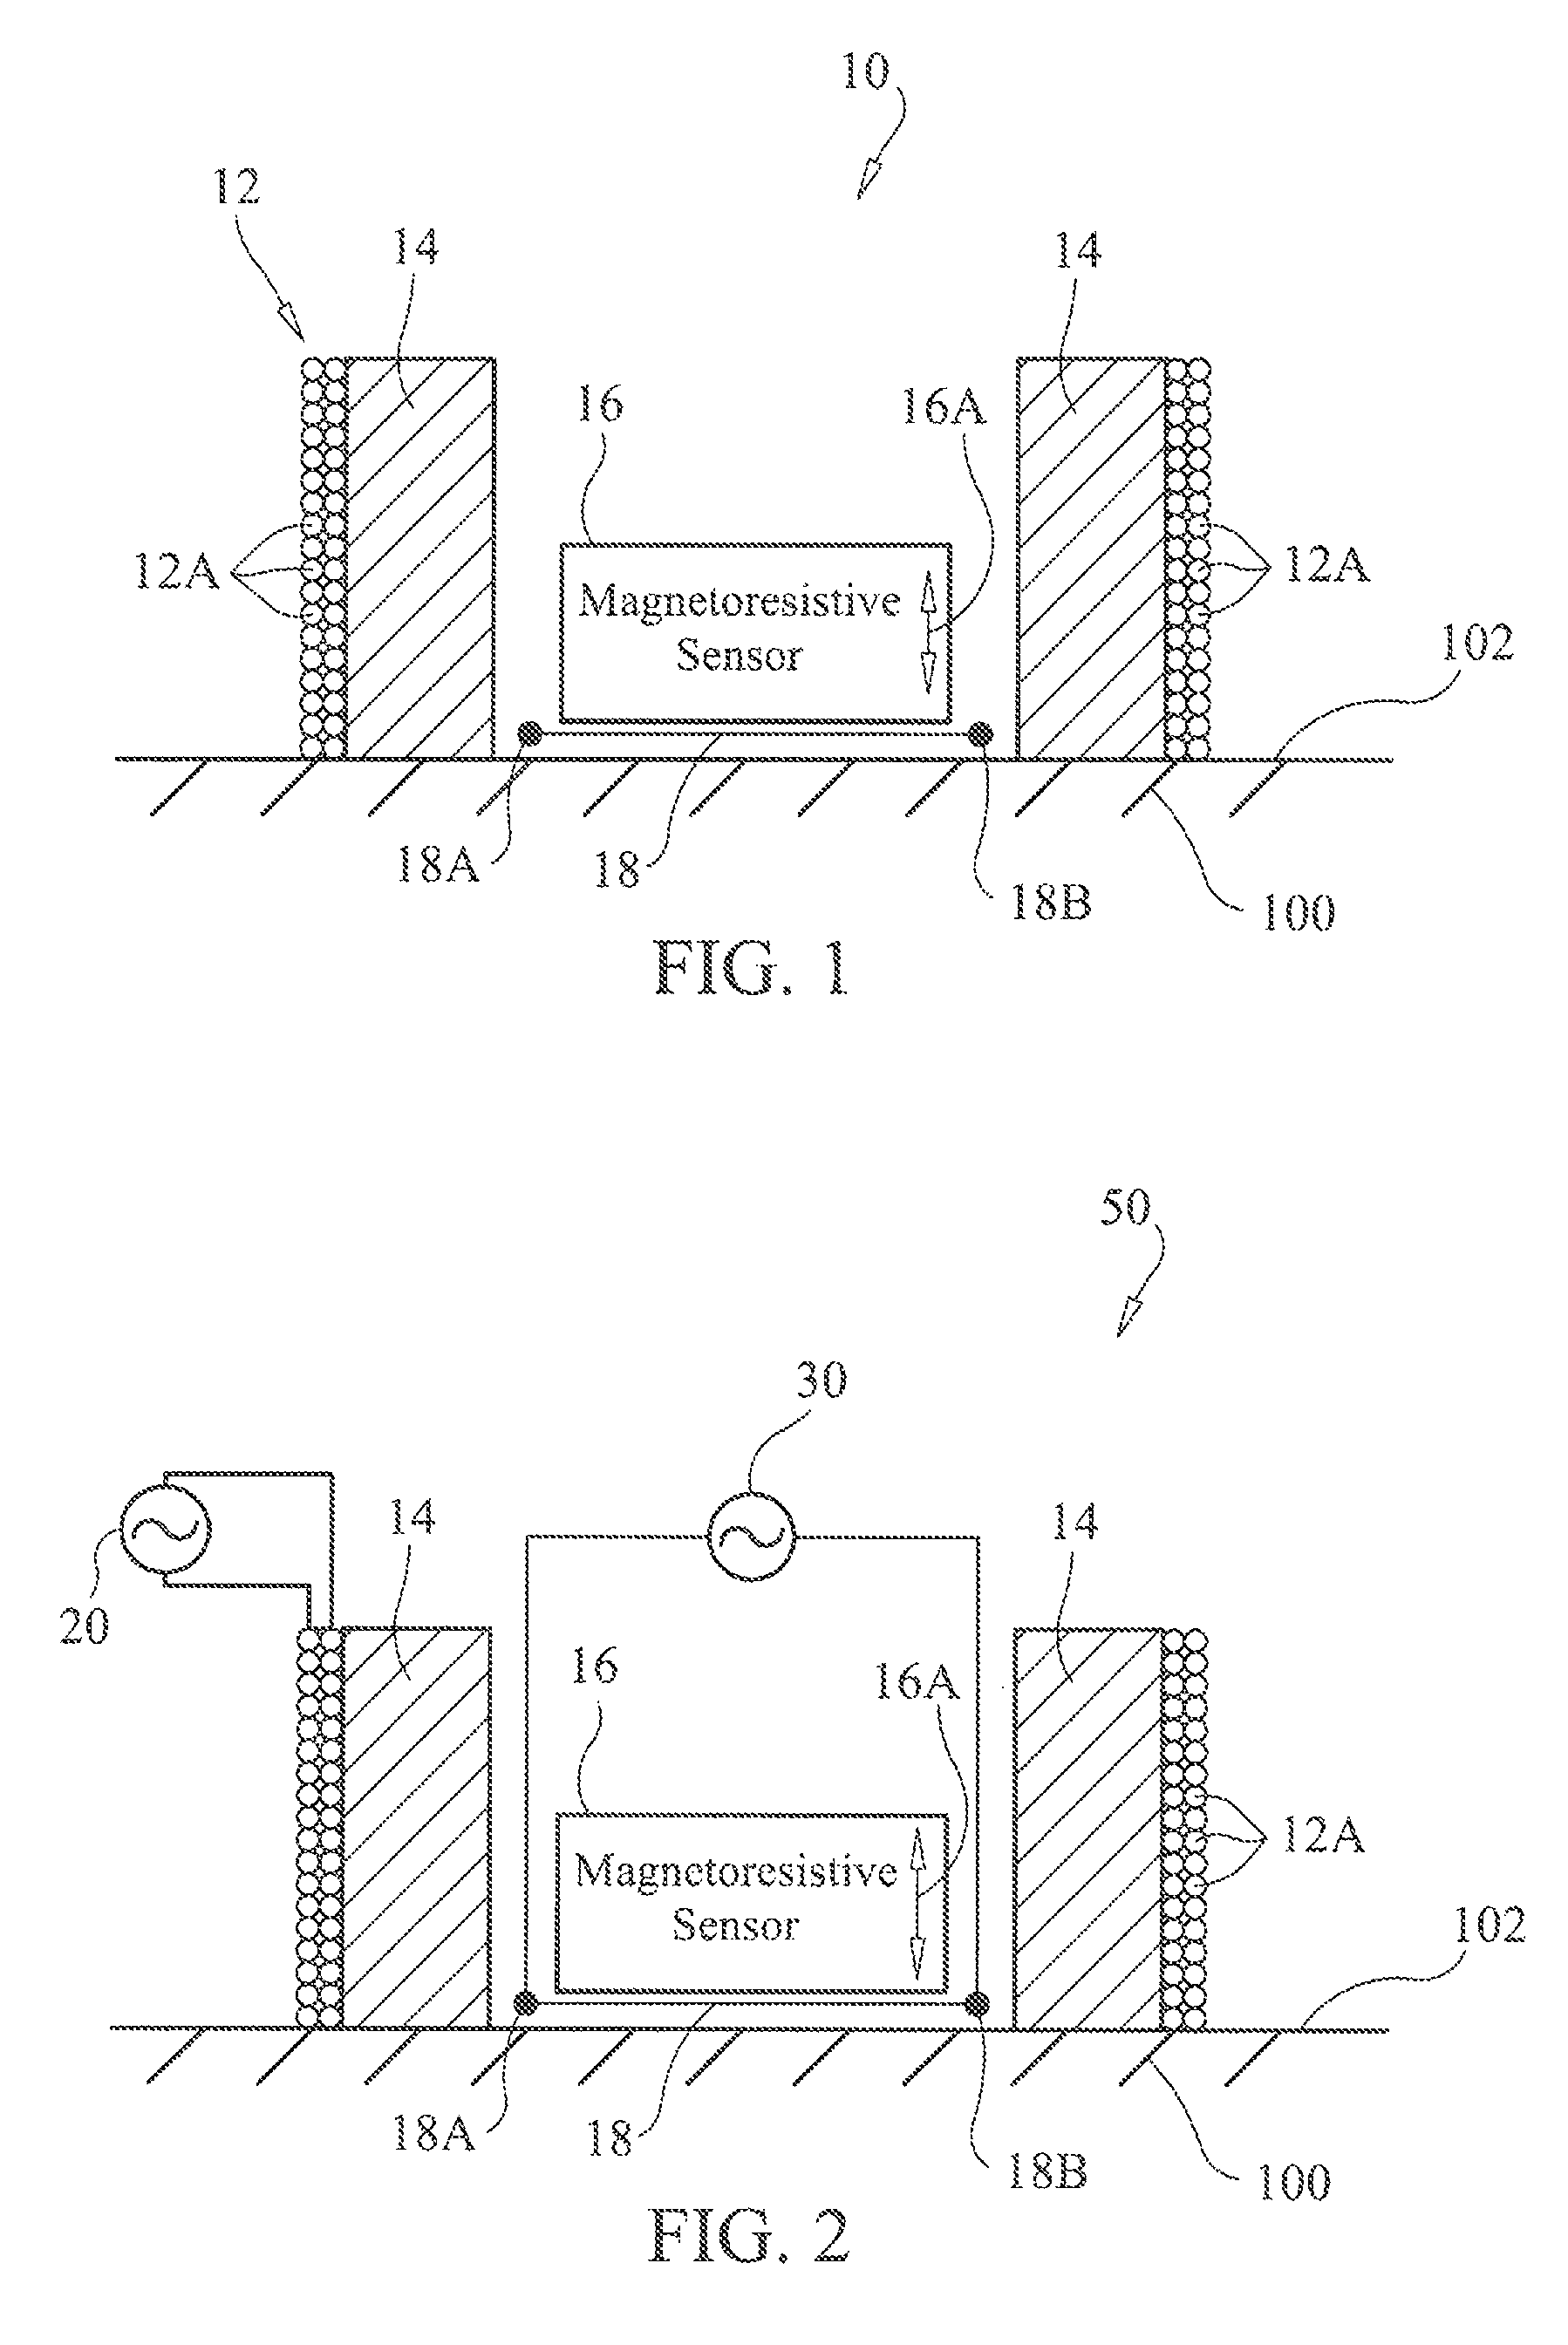 Eddy current probe for surface and sub-surface inspection